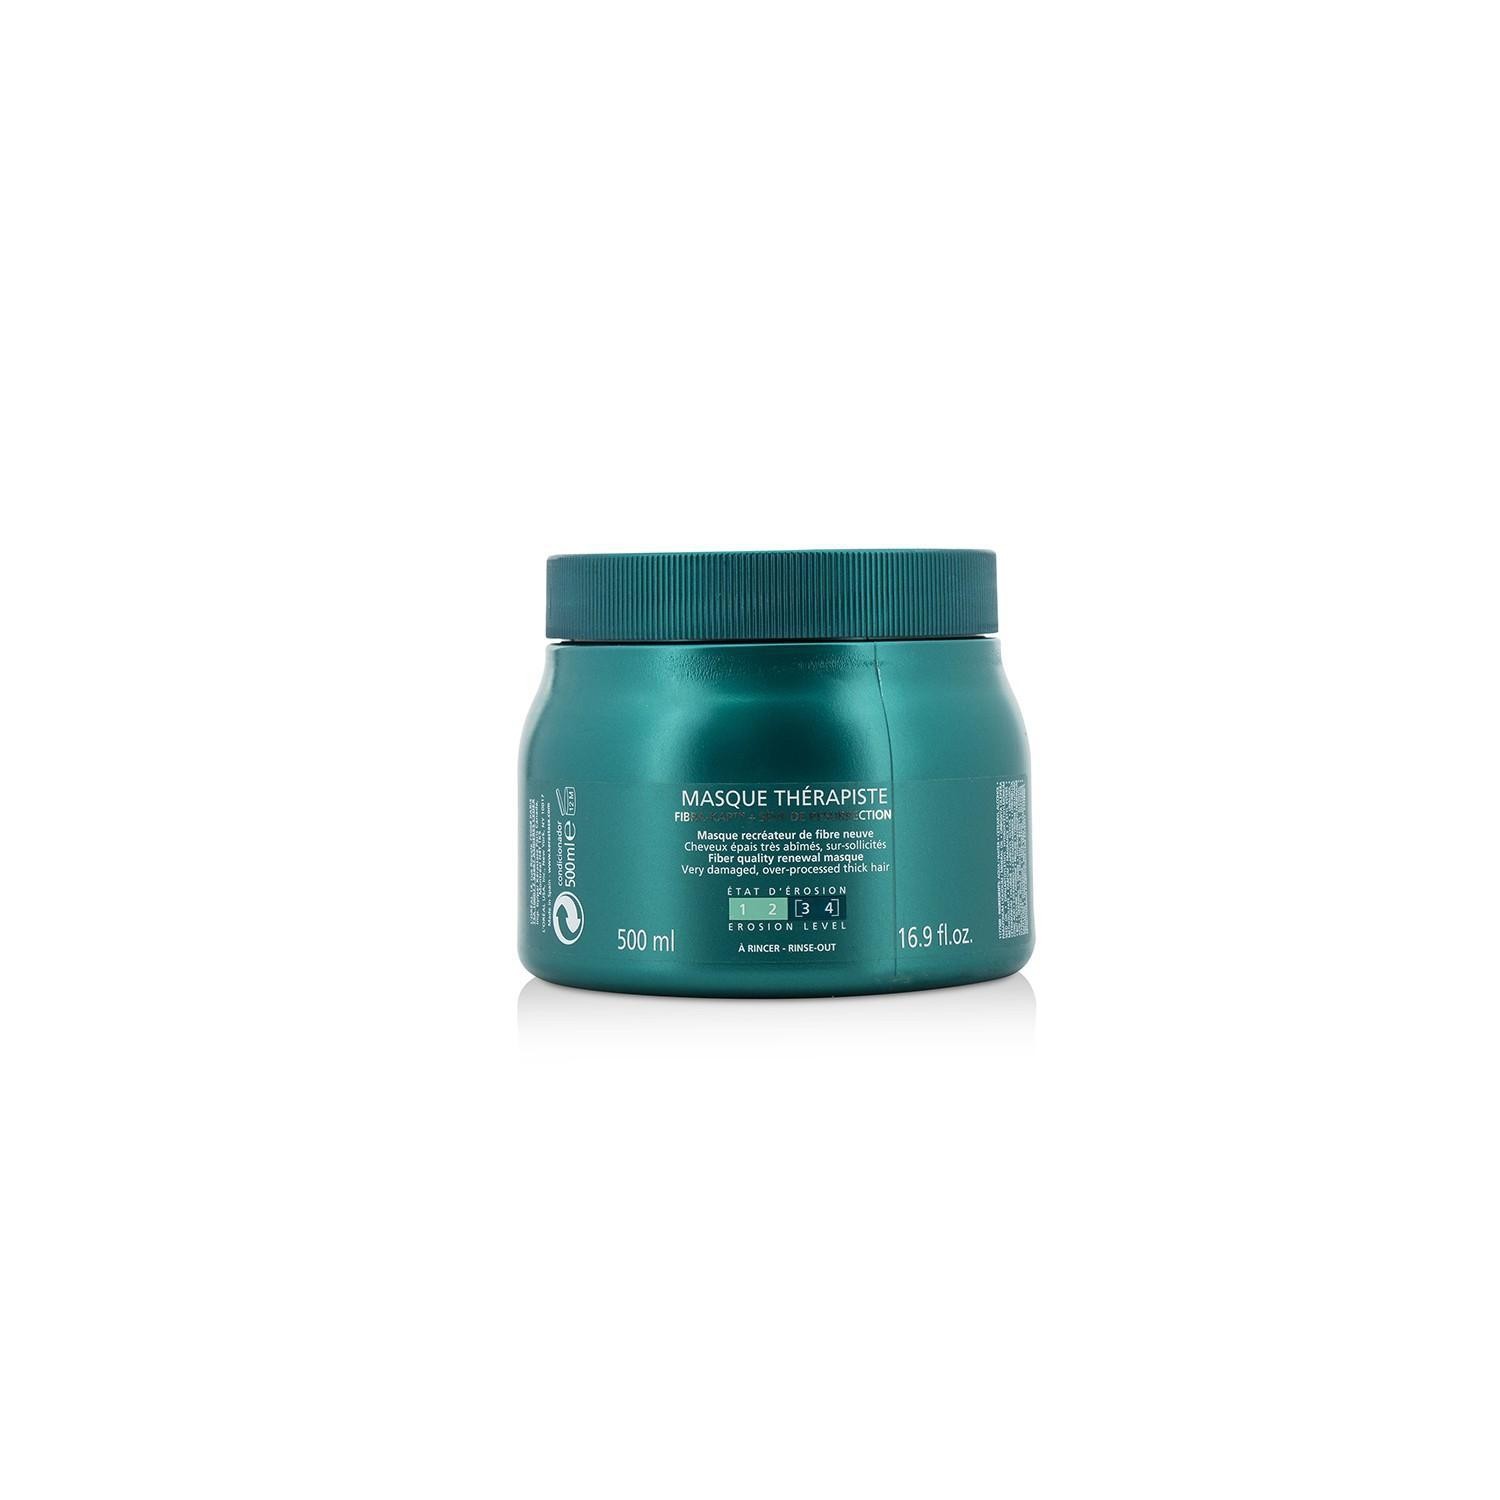 Resistance Masque Therapiste Fiber Quality Renewal Masque (For Very Damaged, Over-Processed Thick Hair) - 500ml-16.9oz